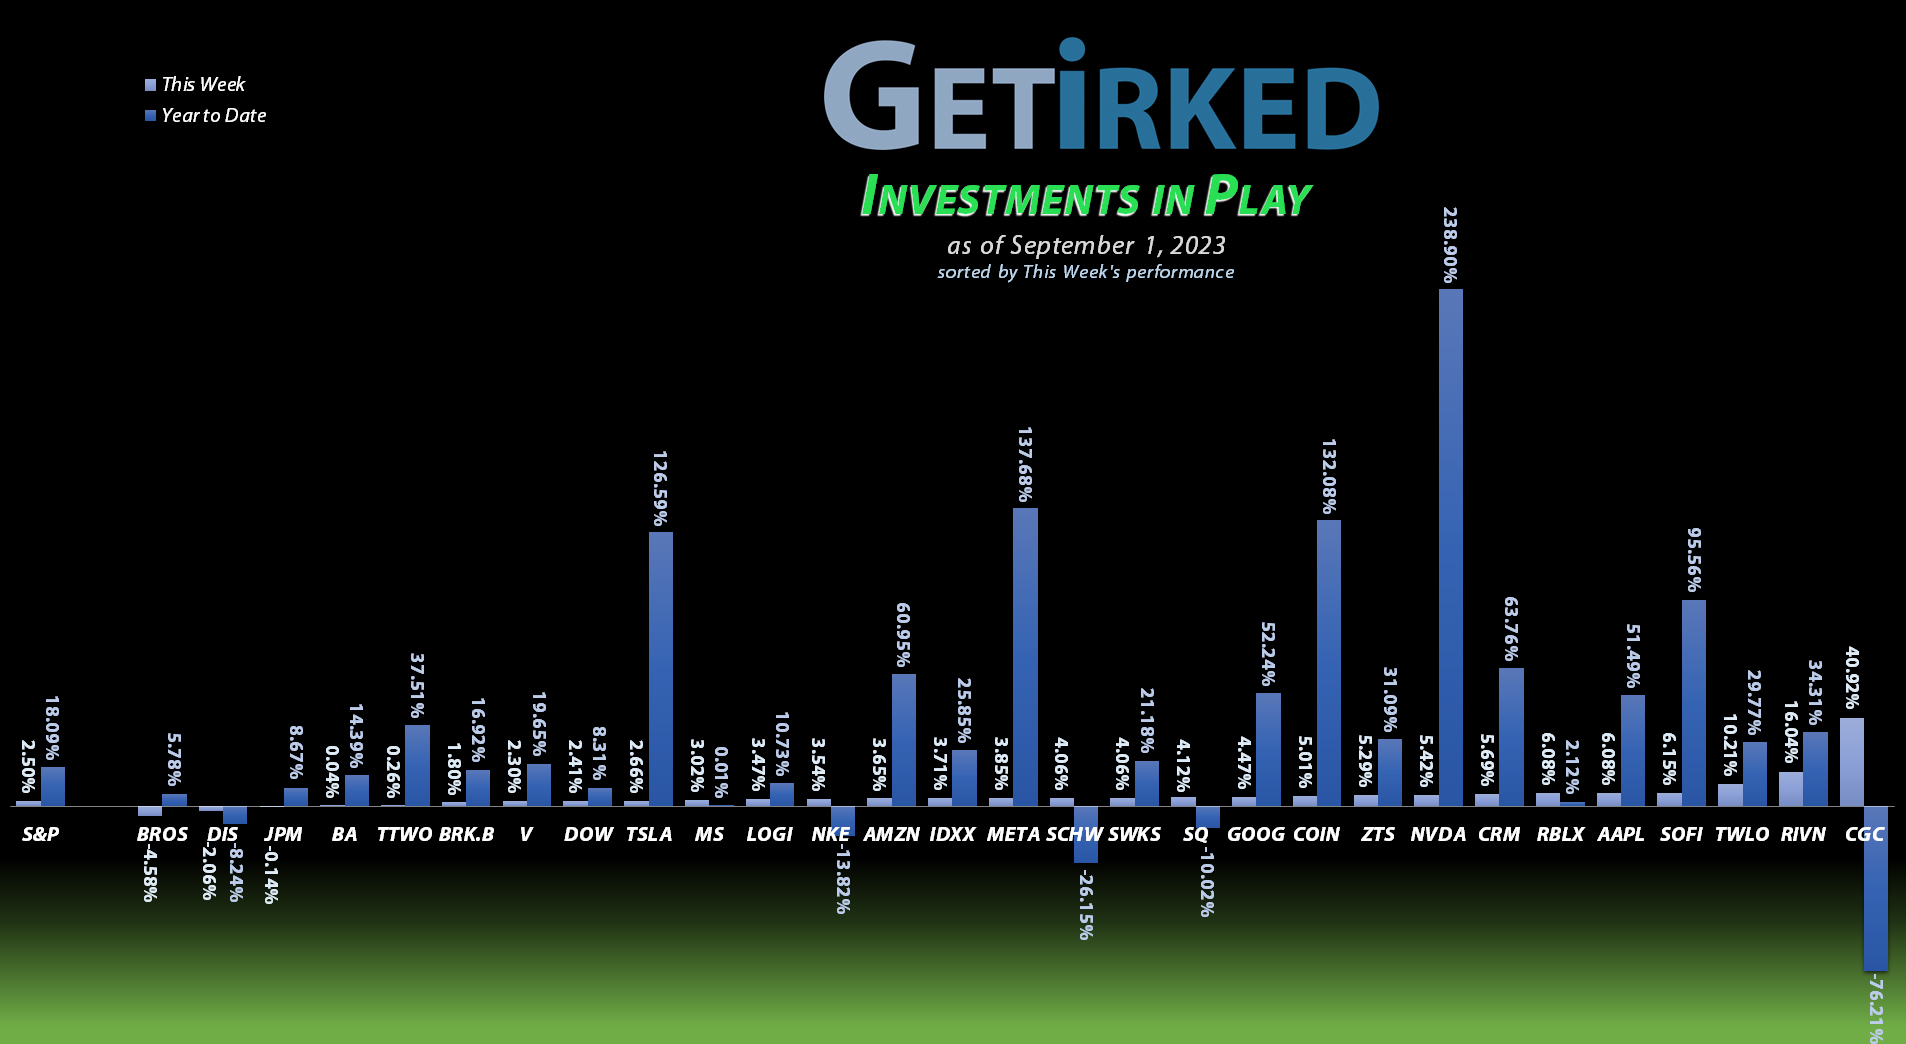 Get Irked's Investments in Play - September 1, 2023